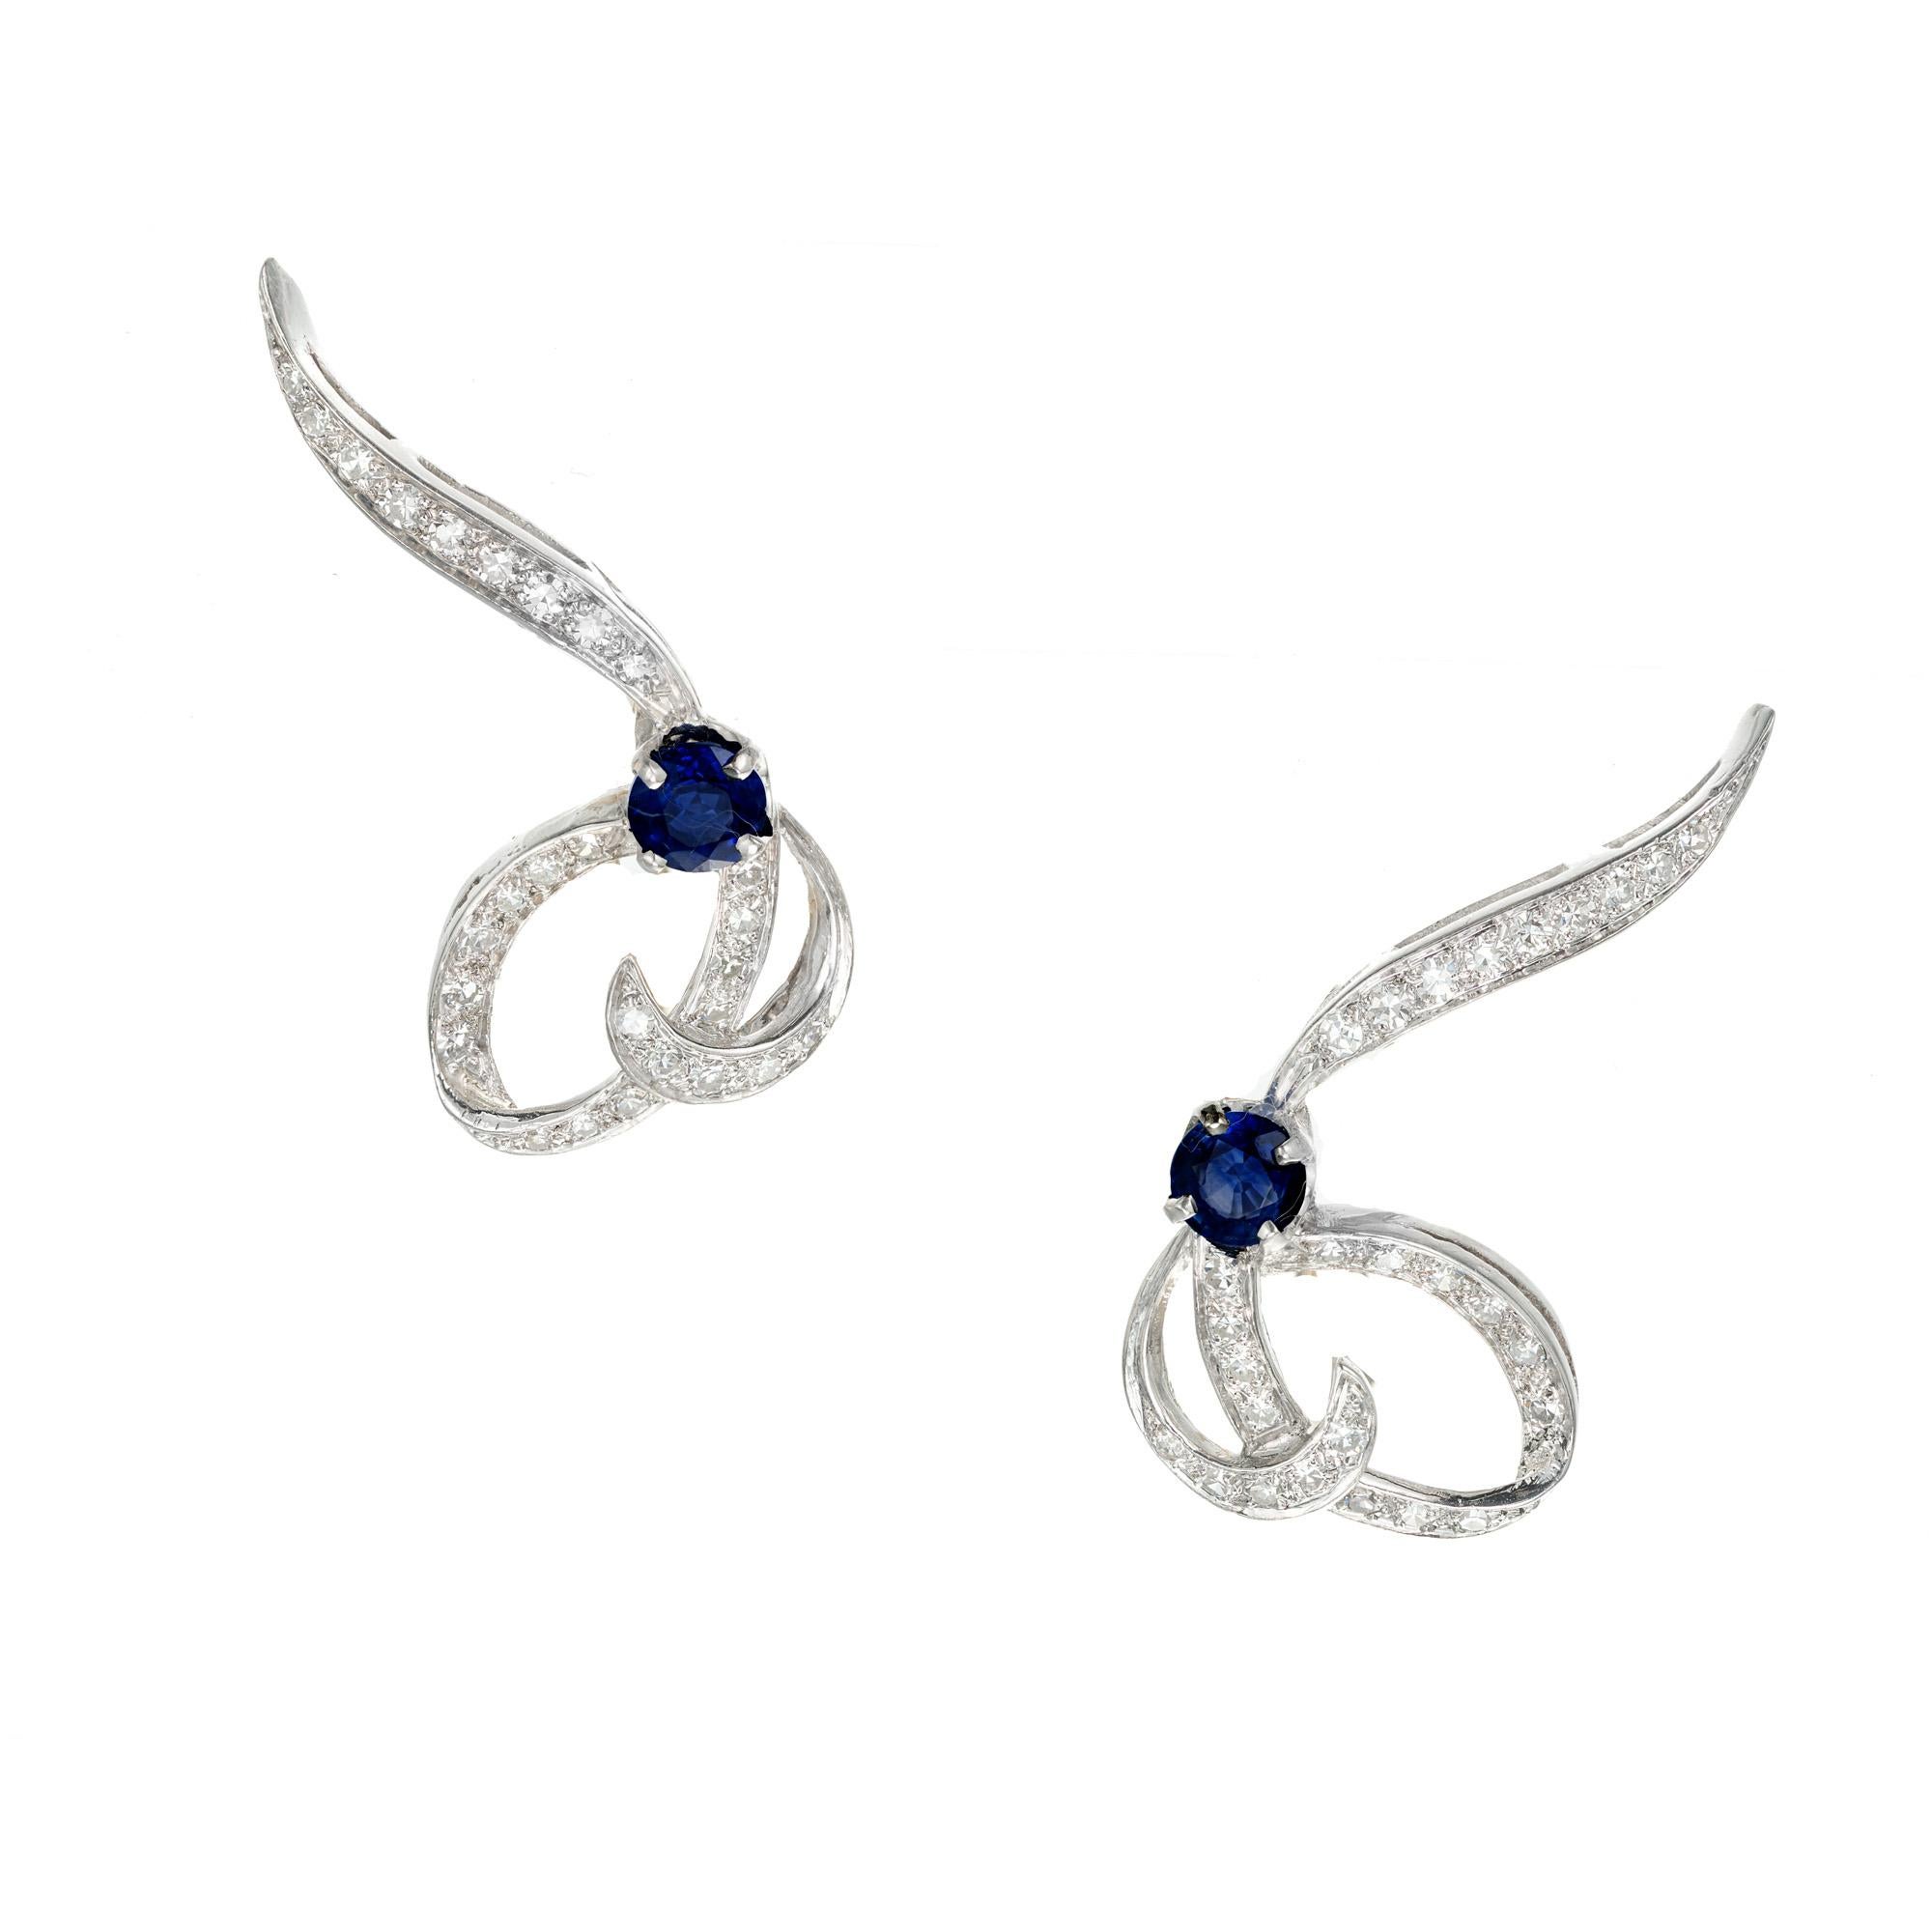 1950's Swirl sapphire and diamond earrings. 2 round sapphires with a total weight of 1.02cts accented with 54 round diamonds approx. total weight .66cts. set in platinum with 14k yellow gold Omega clips and posts. Circa 1950-1960.

2 round Sapphires